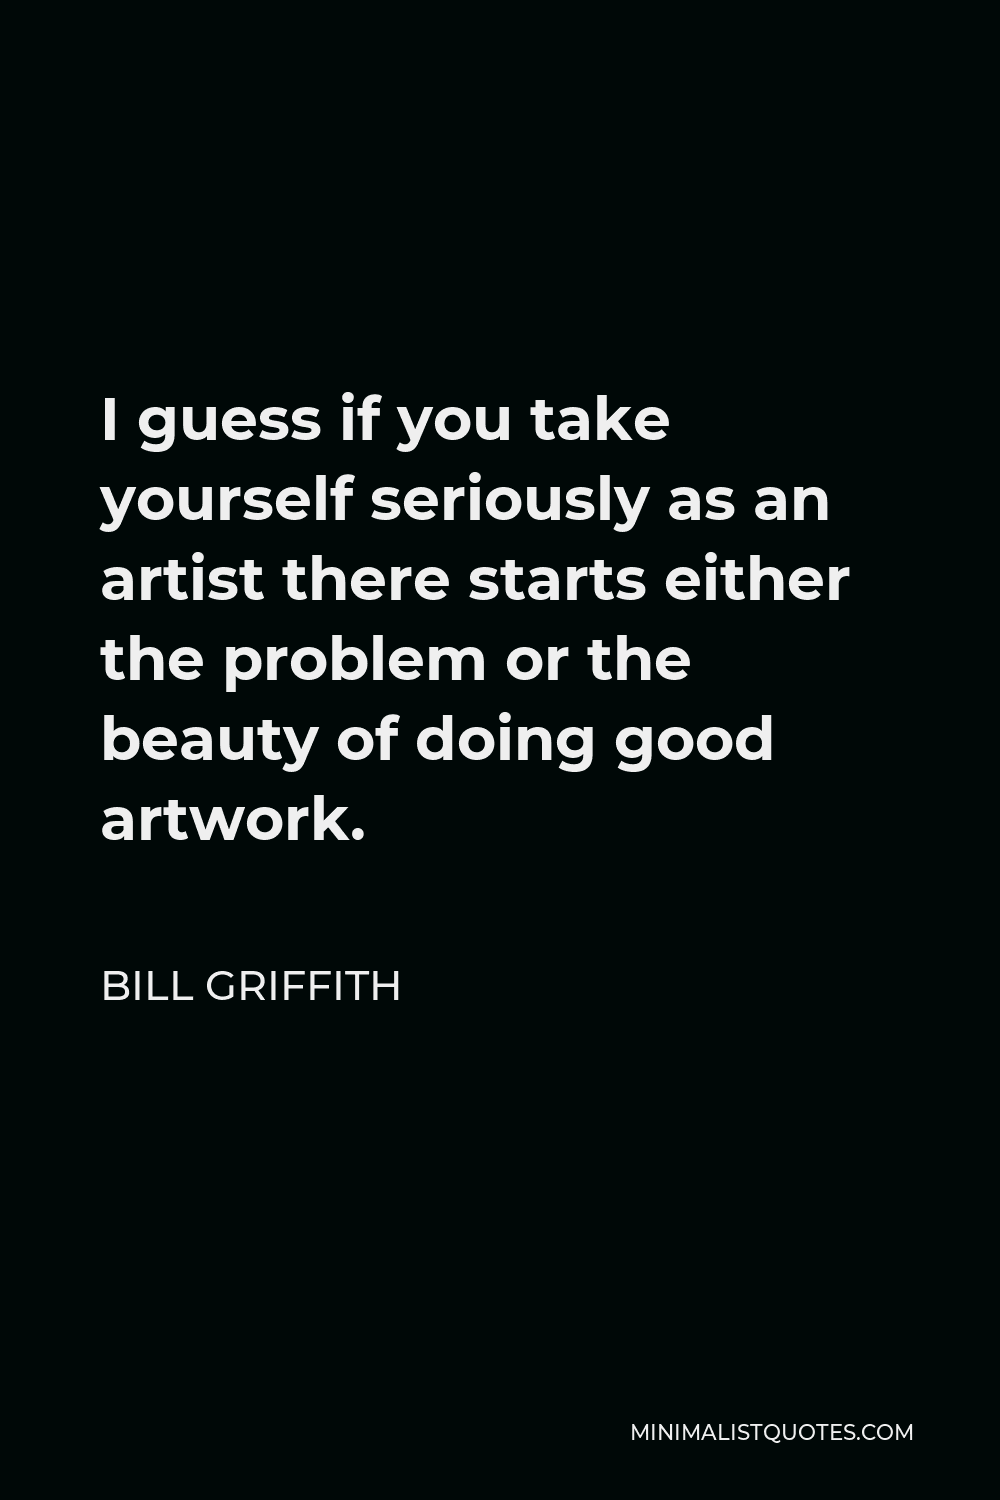 Bill Griffith Quote - I guess if you take yourself seriously as an artist there starts either the problem or the beauty of doing good artwork.